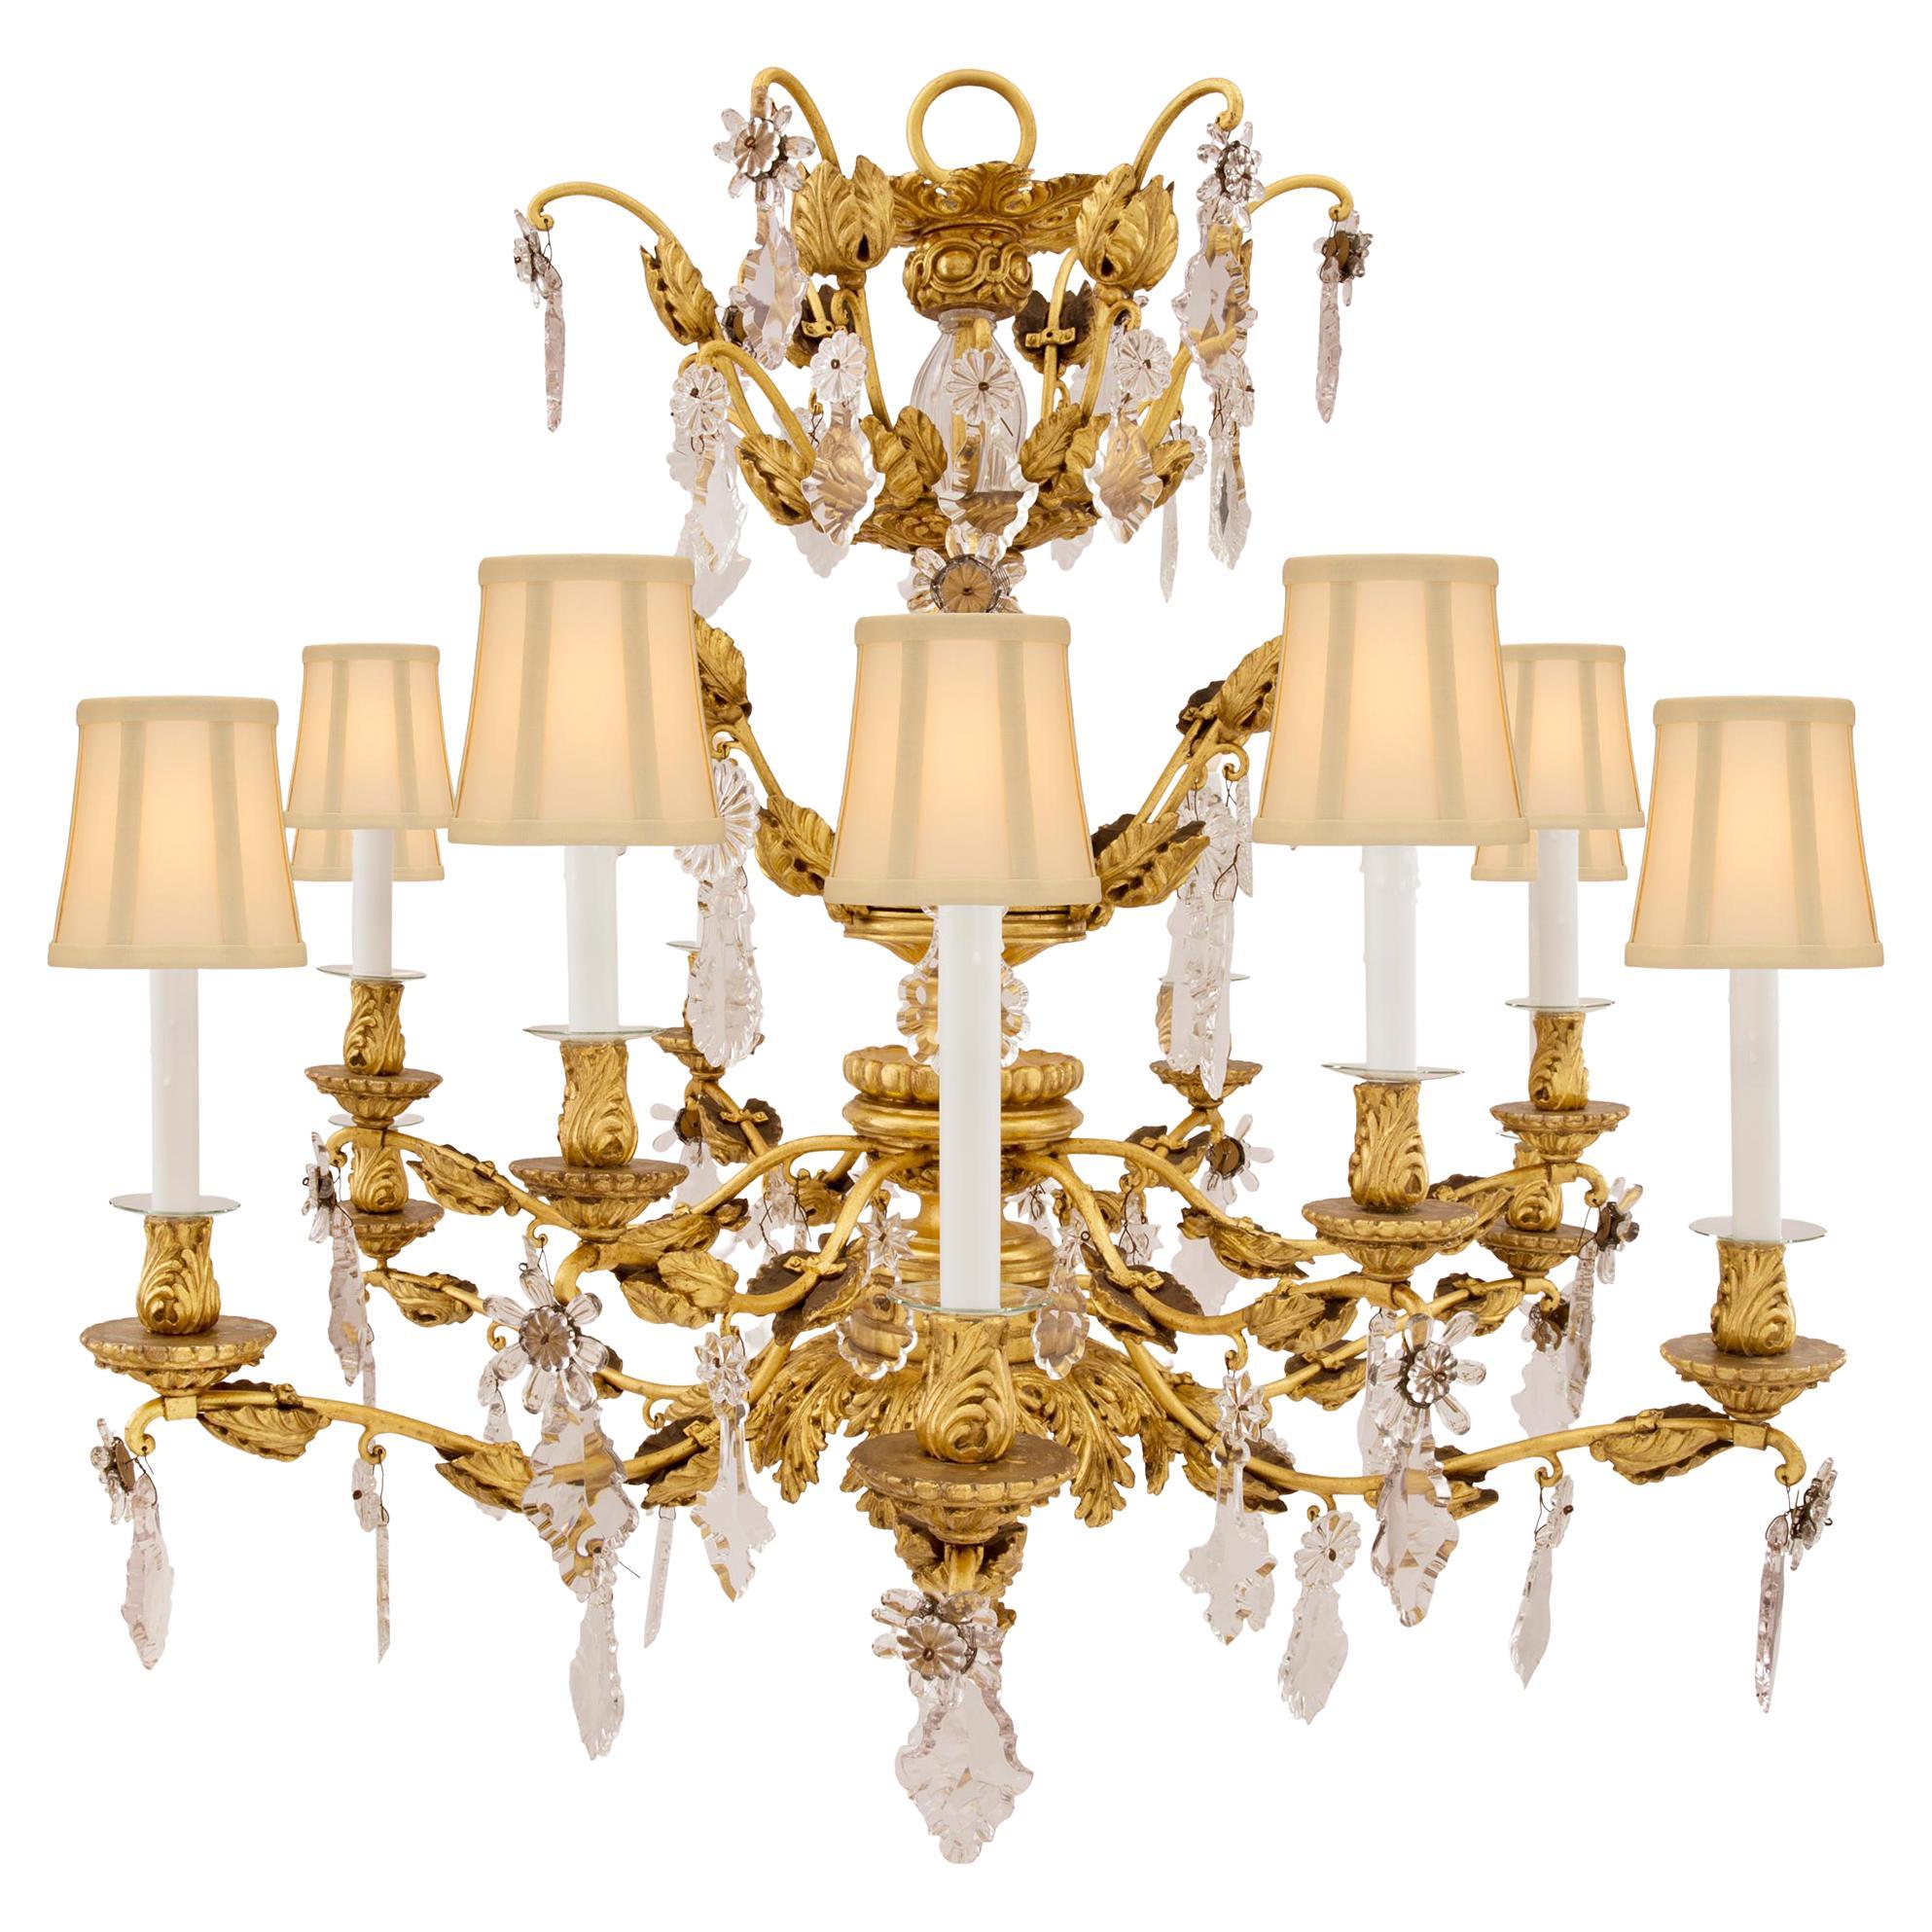 Italian Early 19th Century Tuscan Giltwood, Gilt Metal and Crystal Chandelier